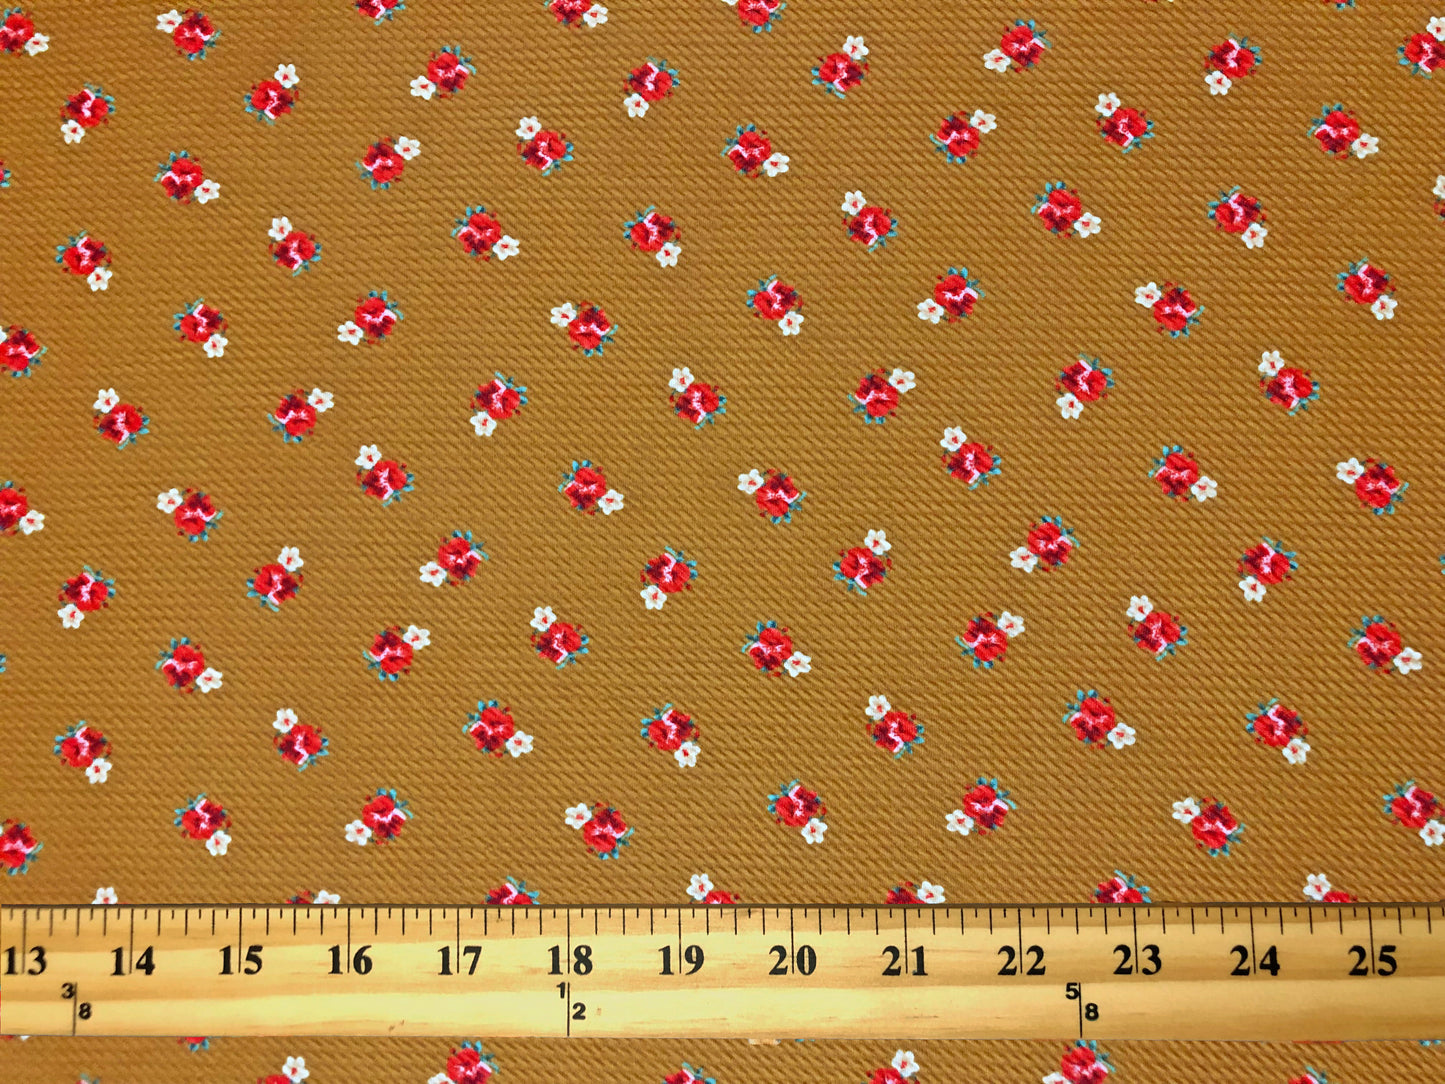 Bullet Knit Printed Fabric-Mustard Red Roses-BPR262-Sold by the Yard